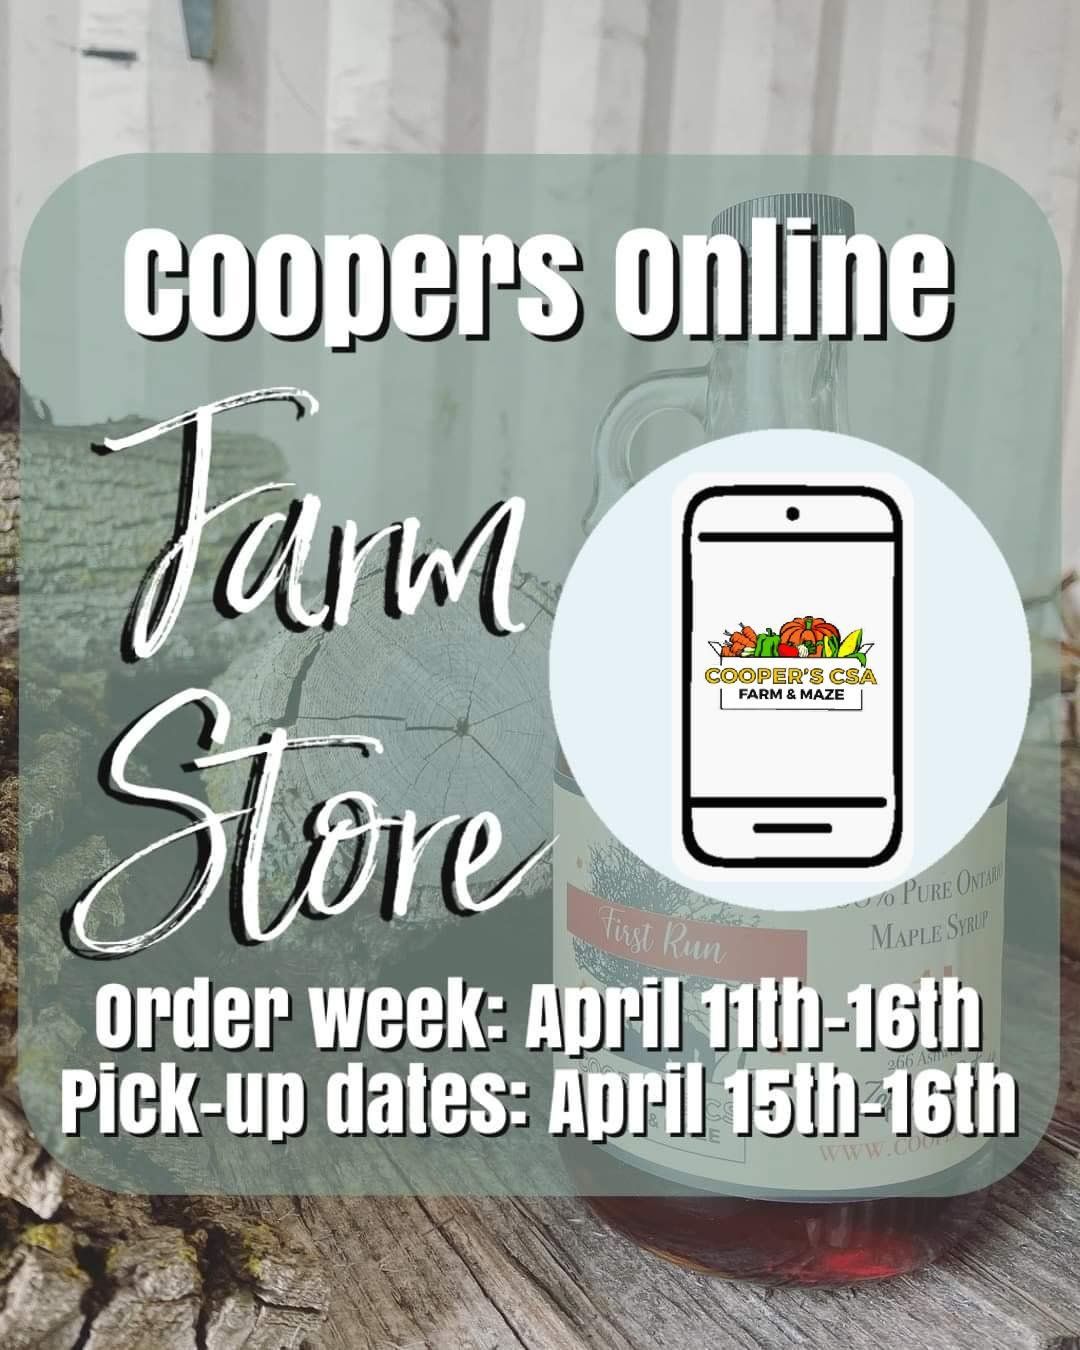 Coopers Online Farm Stand- Order week April 11th-16th